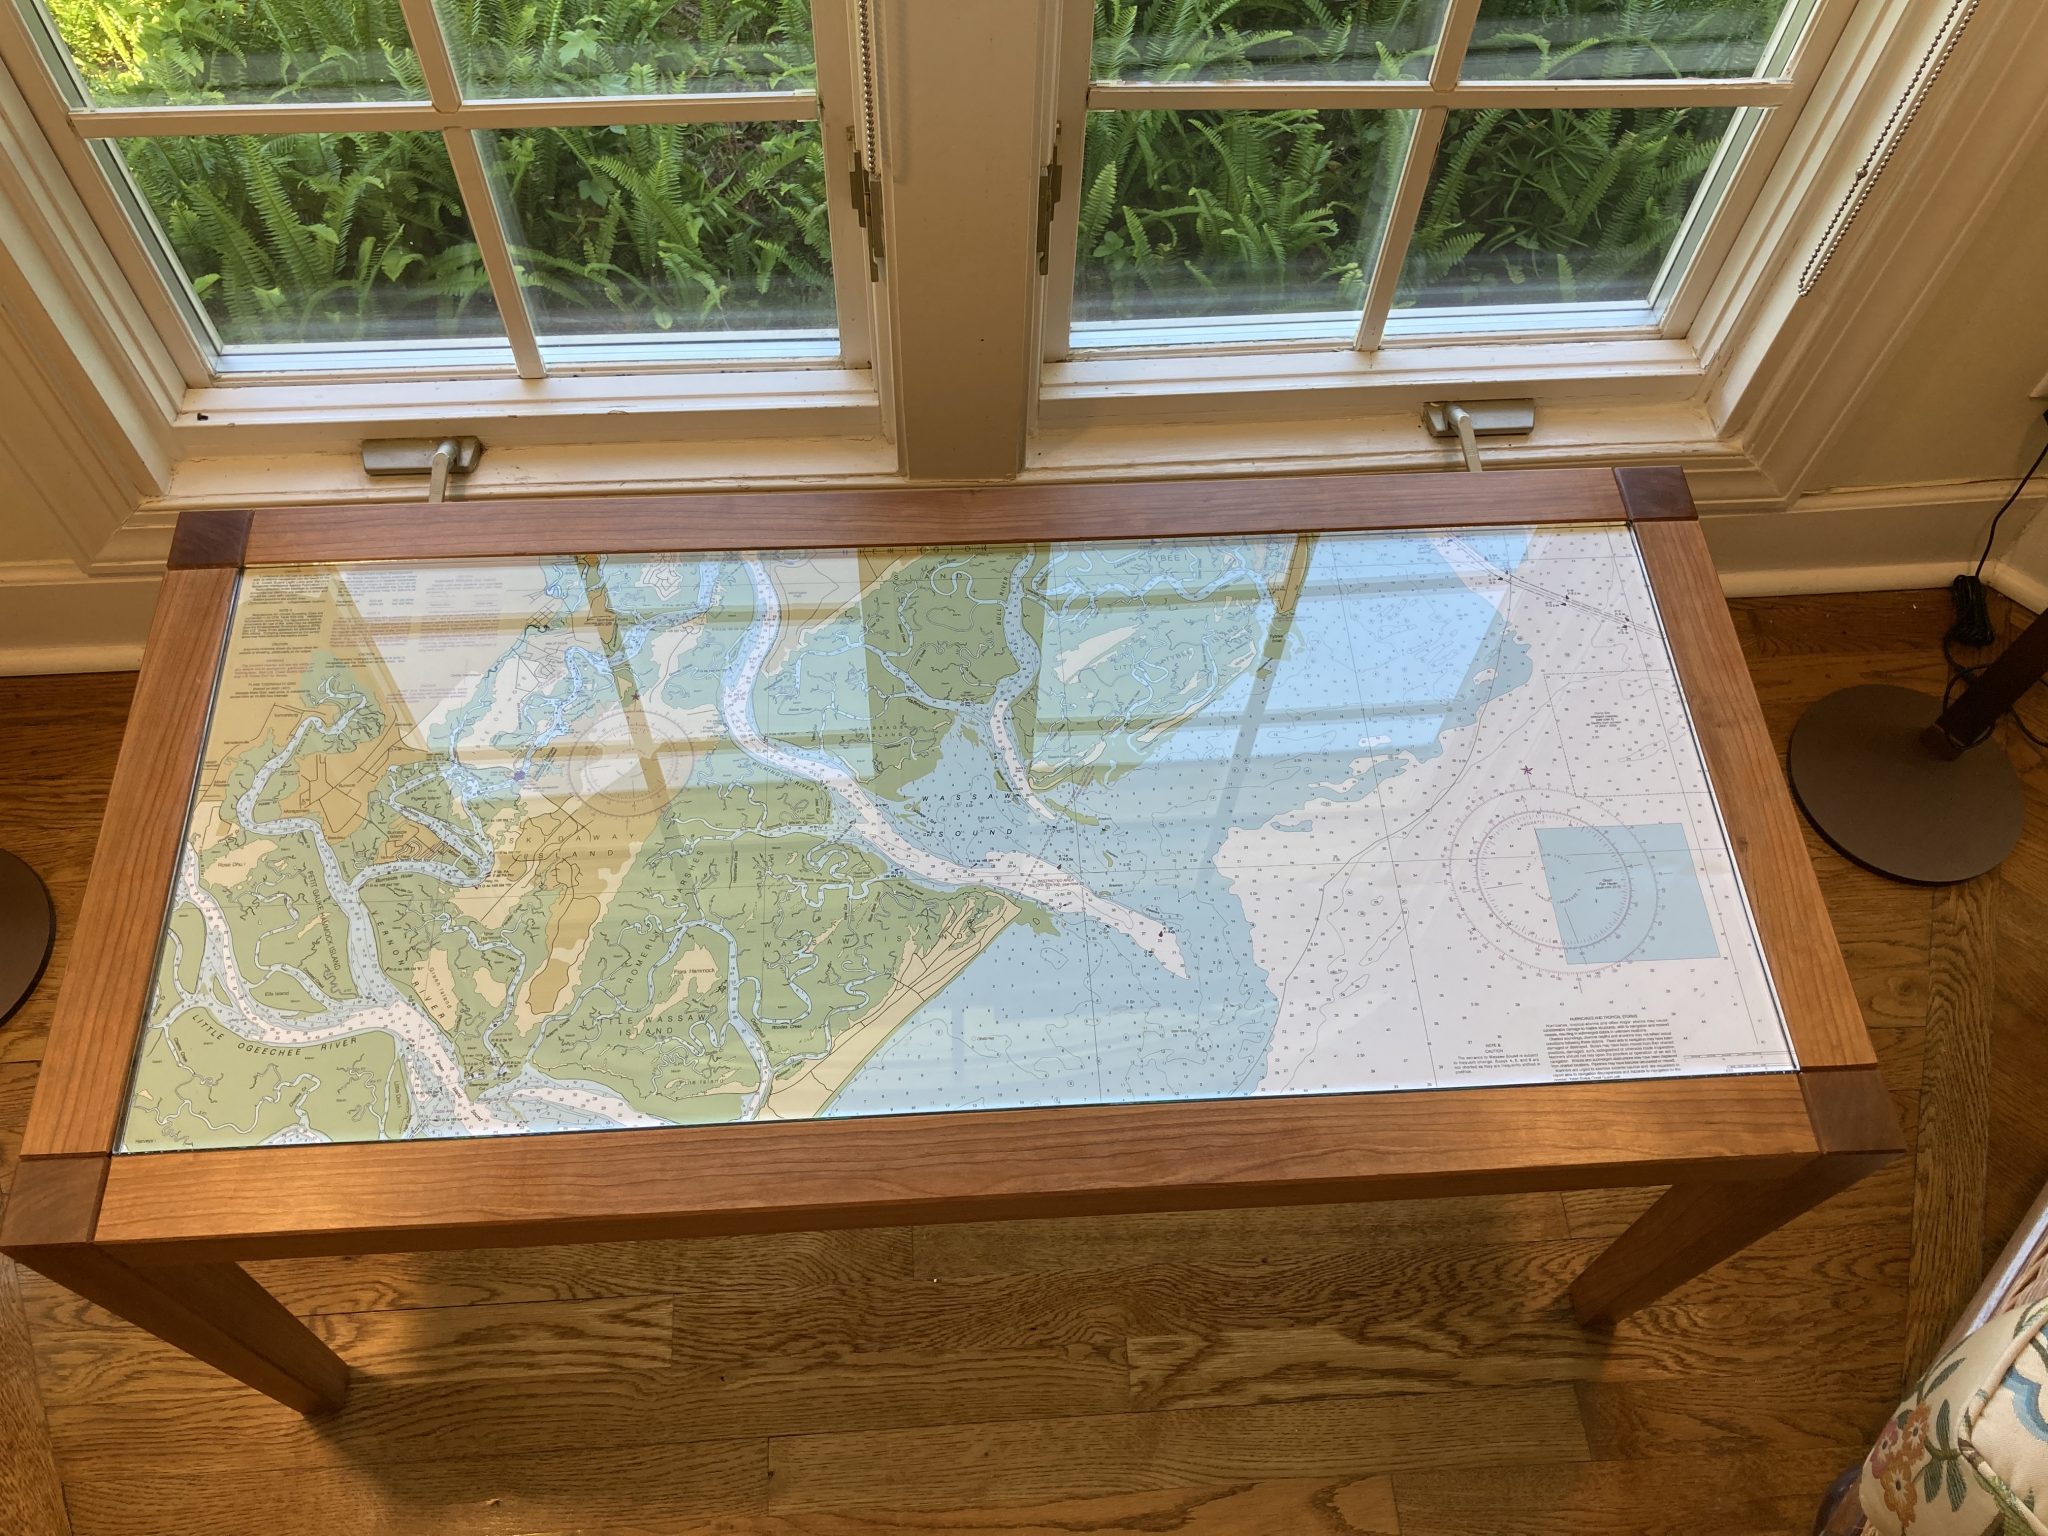 Table with inserted chart of Savannah waters in cherry